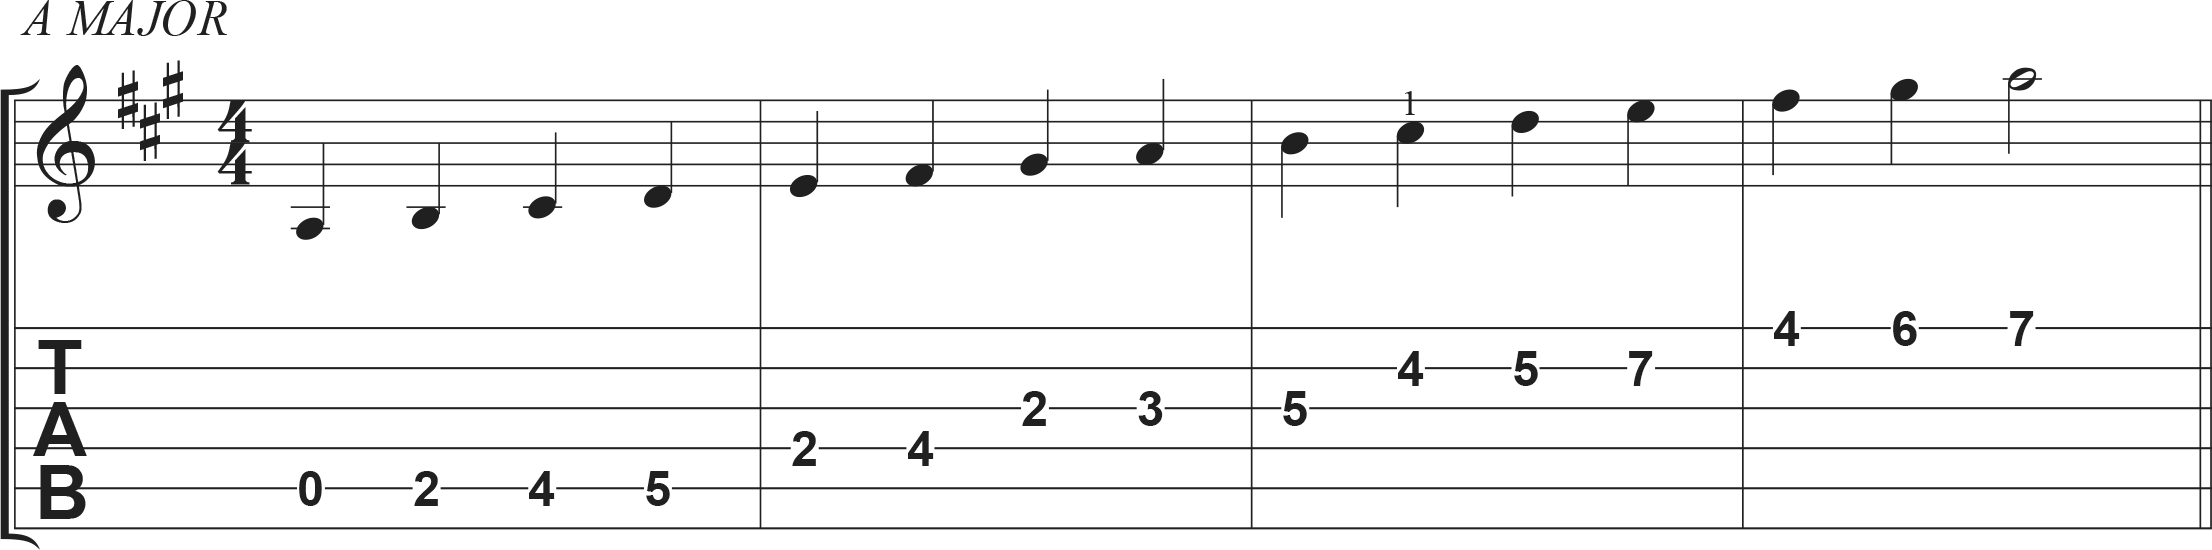 Open D Guitar Tuning A Major Scale